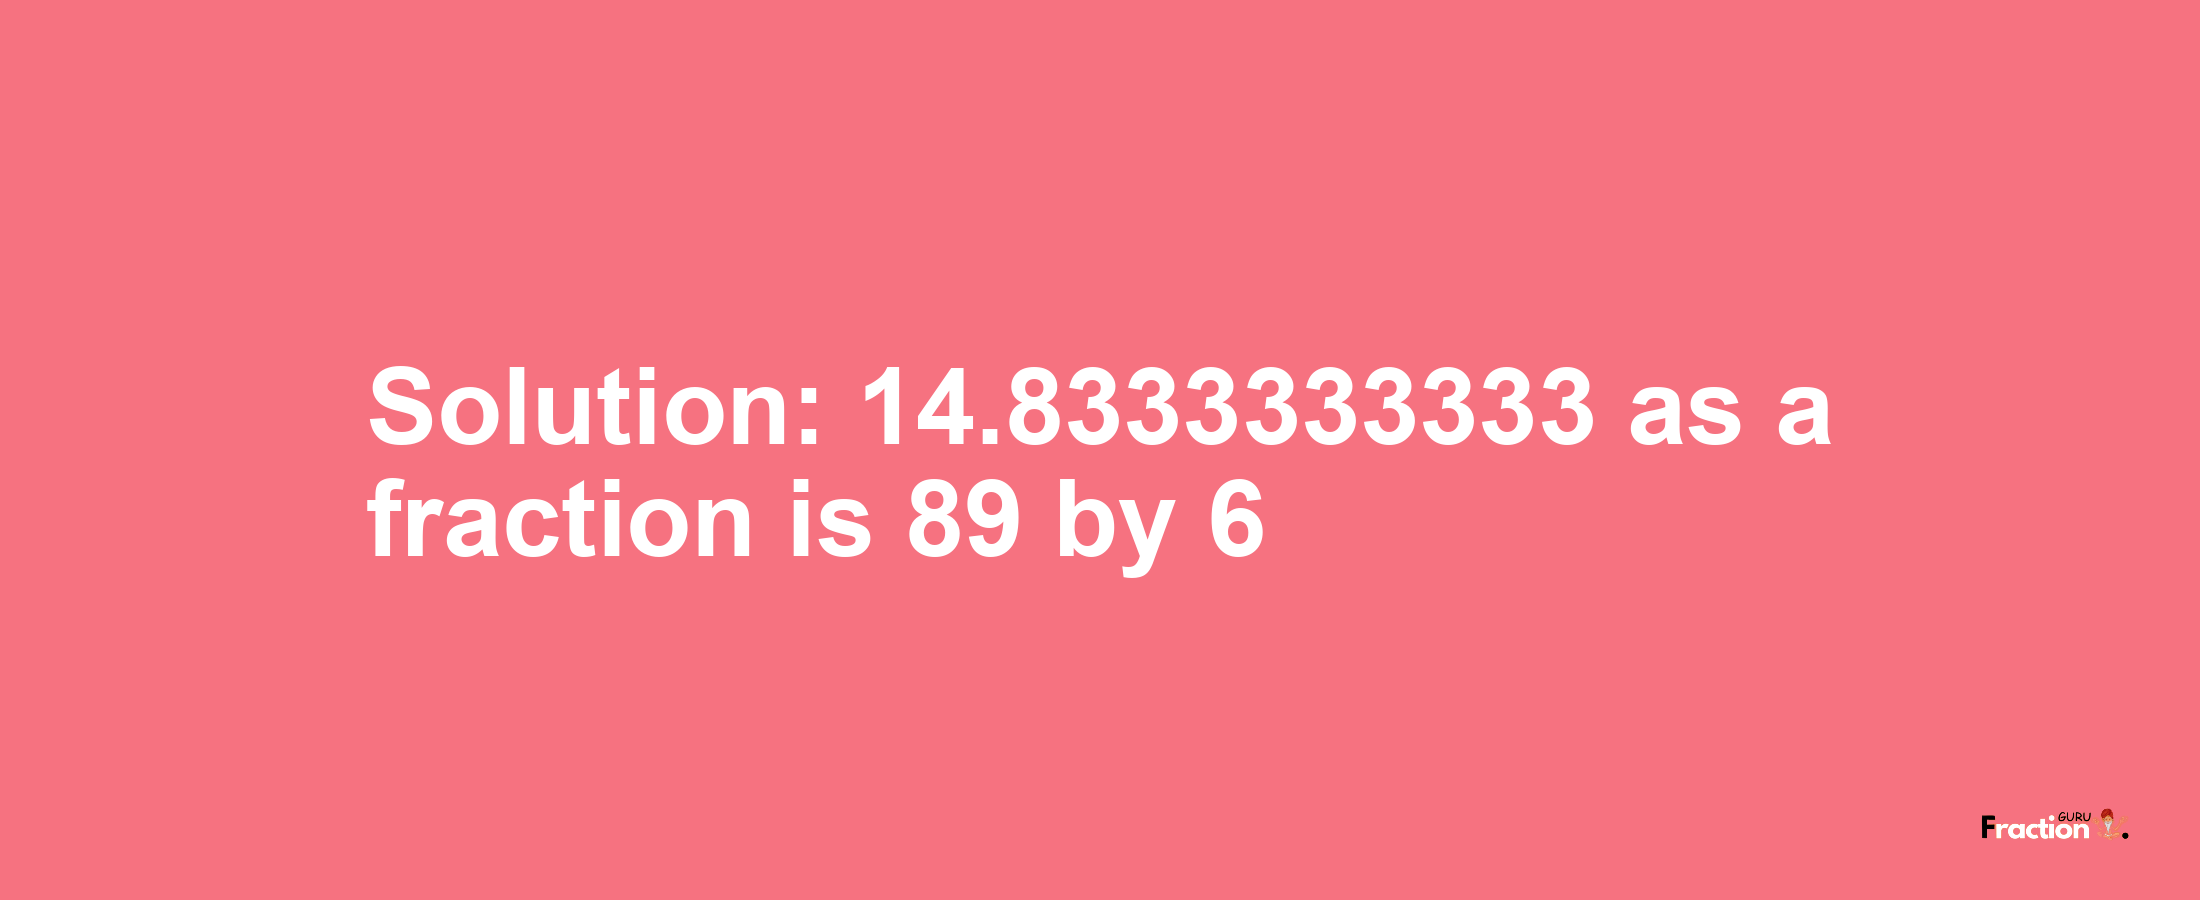 Solution:14.8333333333 as a fraction is 89/6